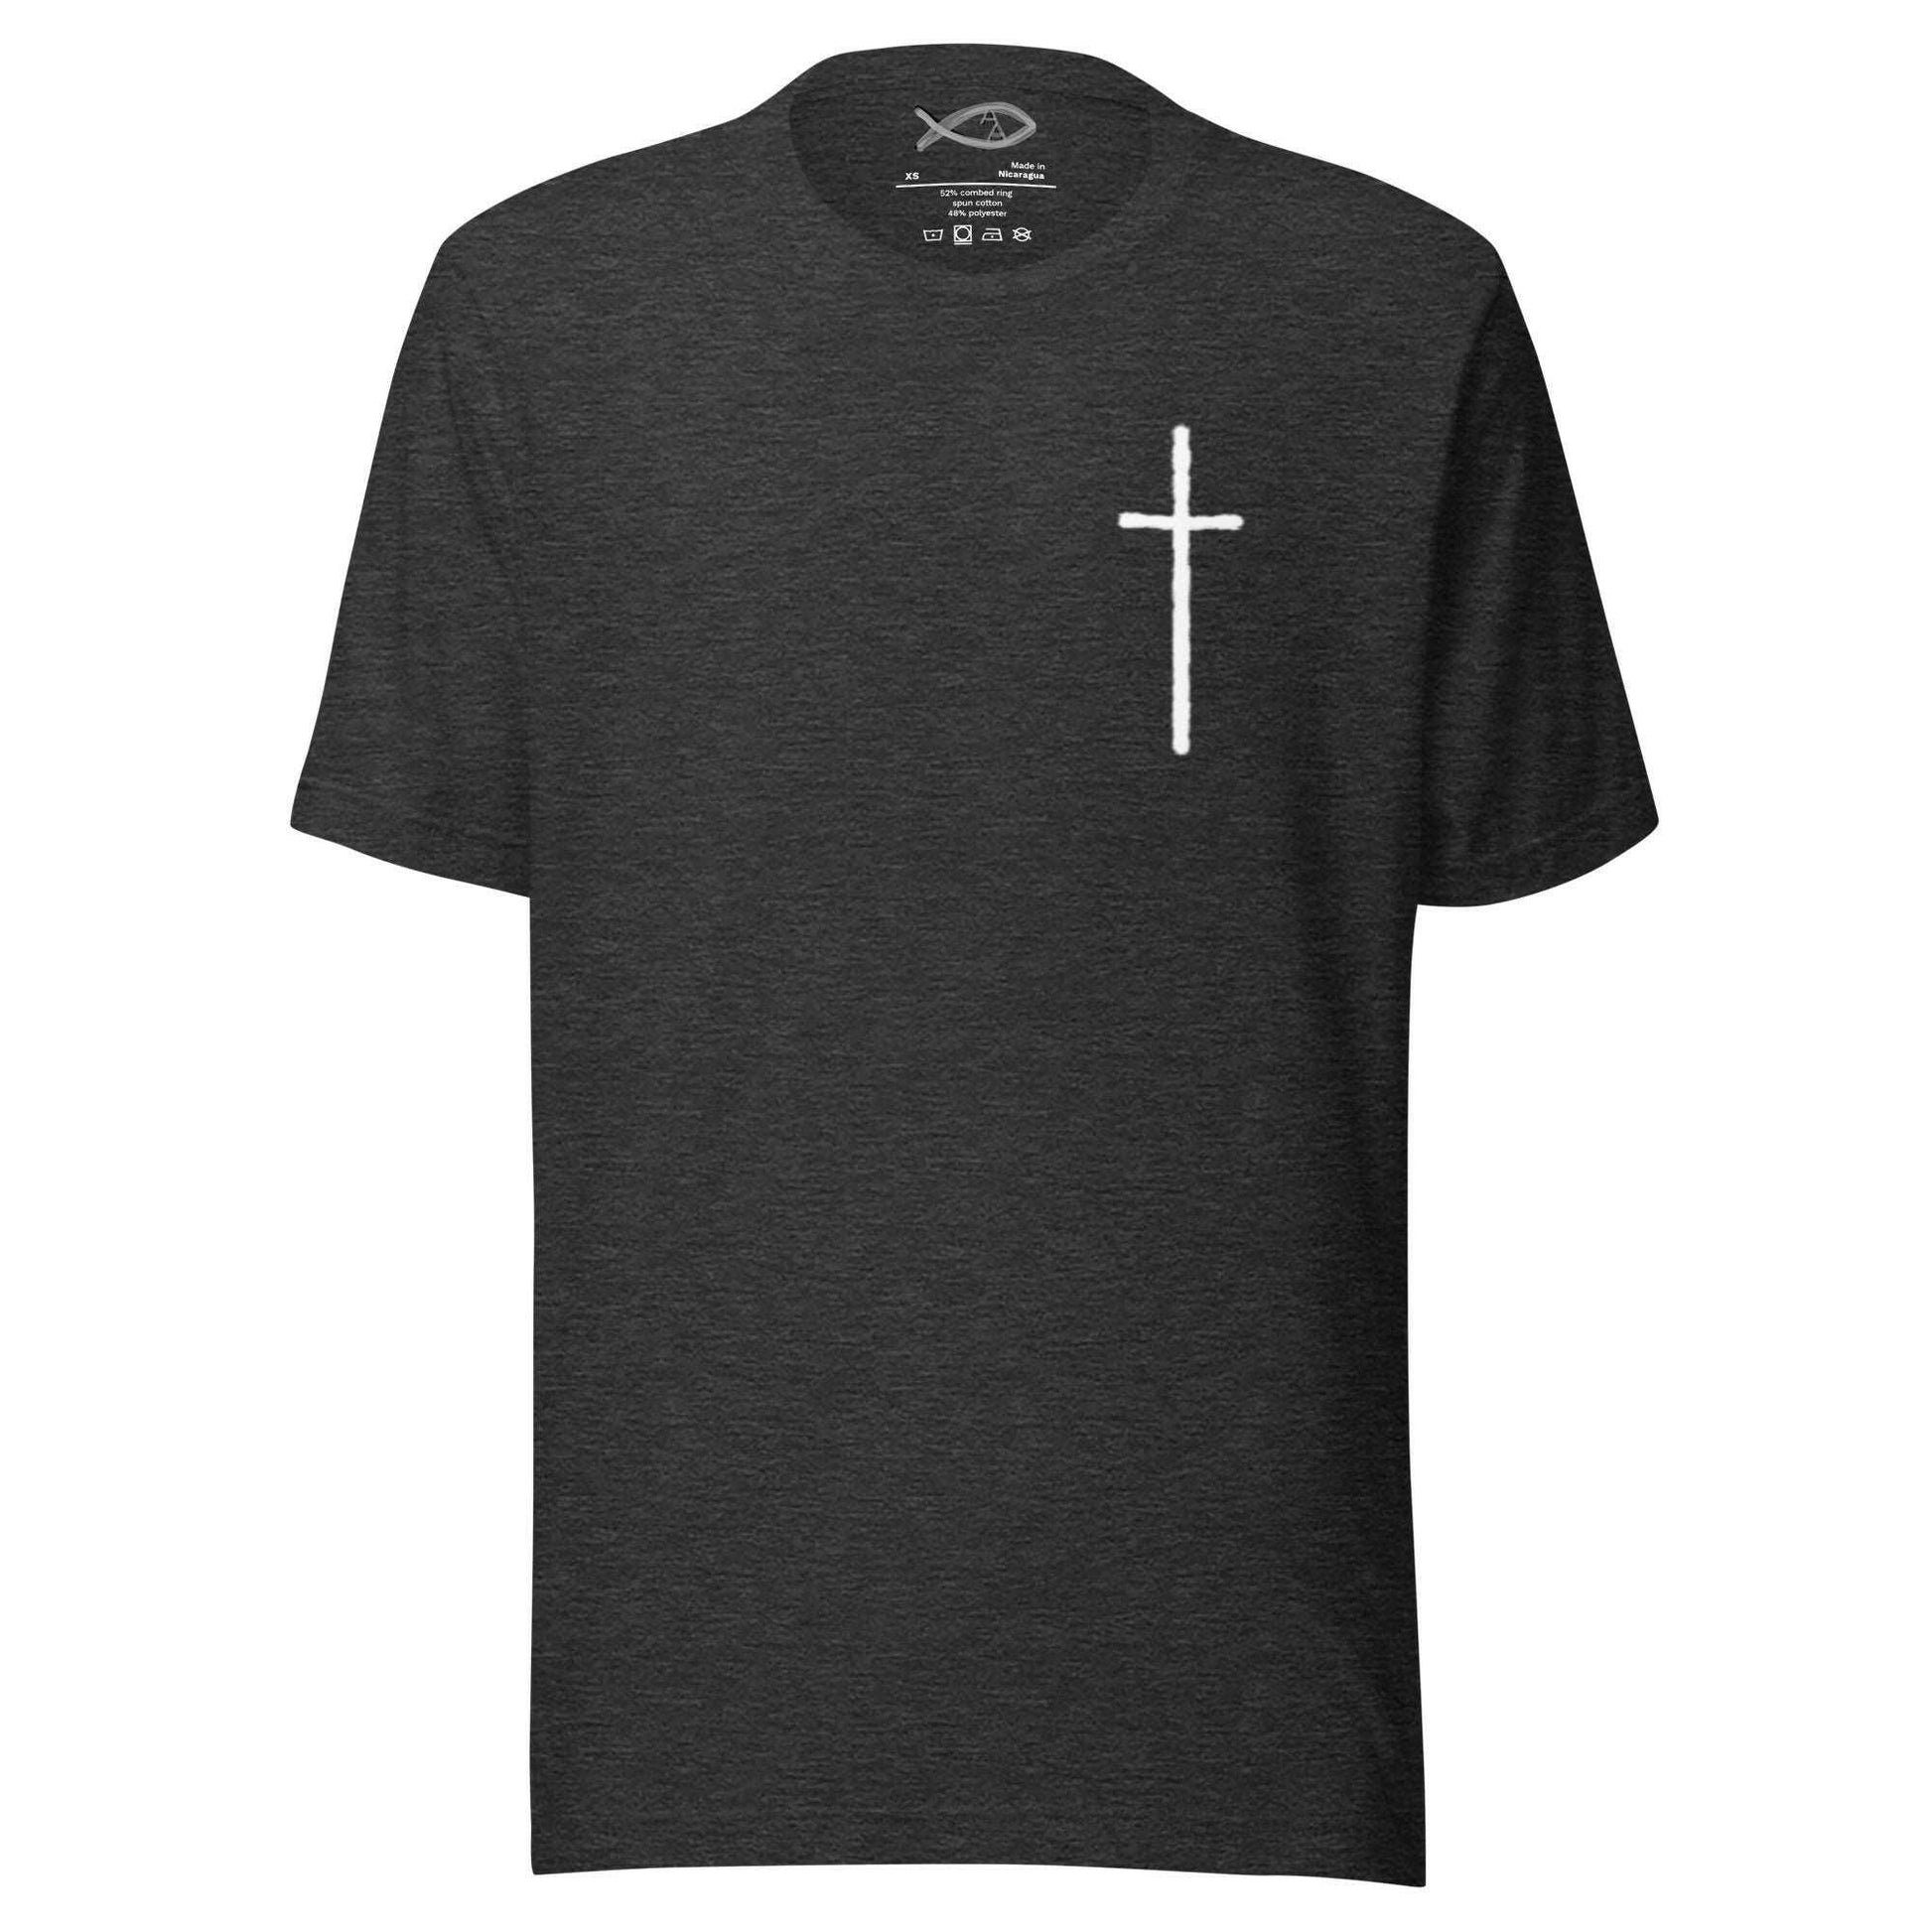 Almighty Apparel - Unisex t-shirt